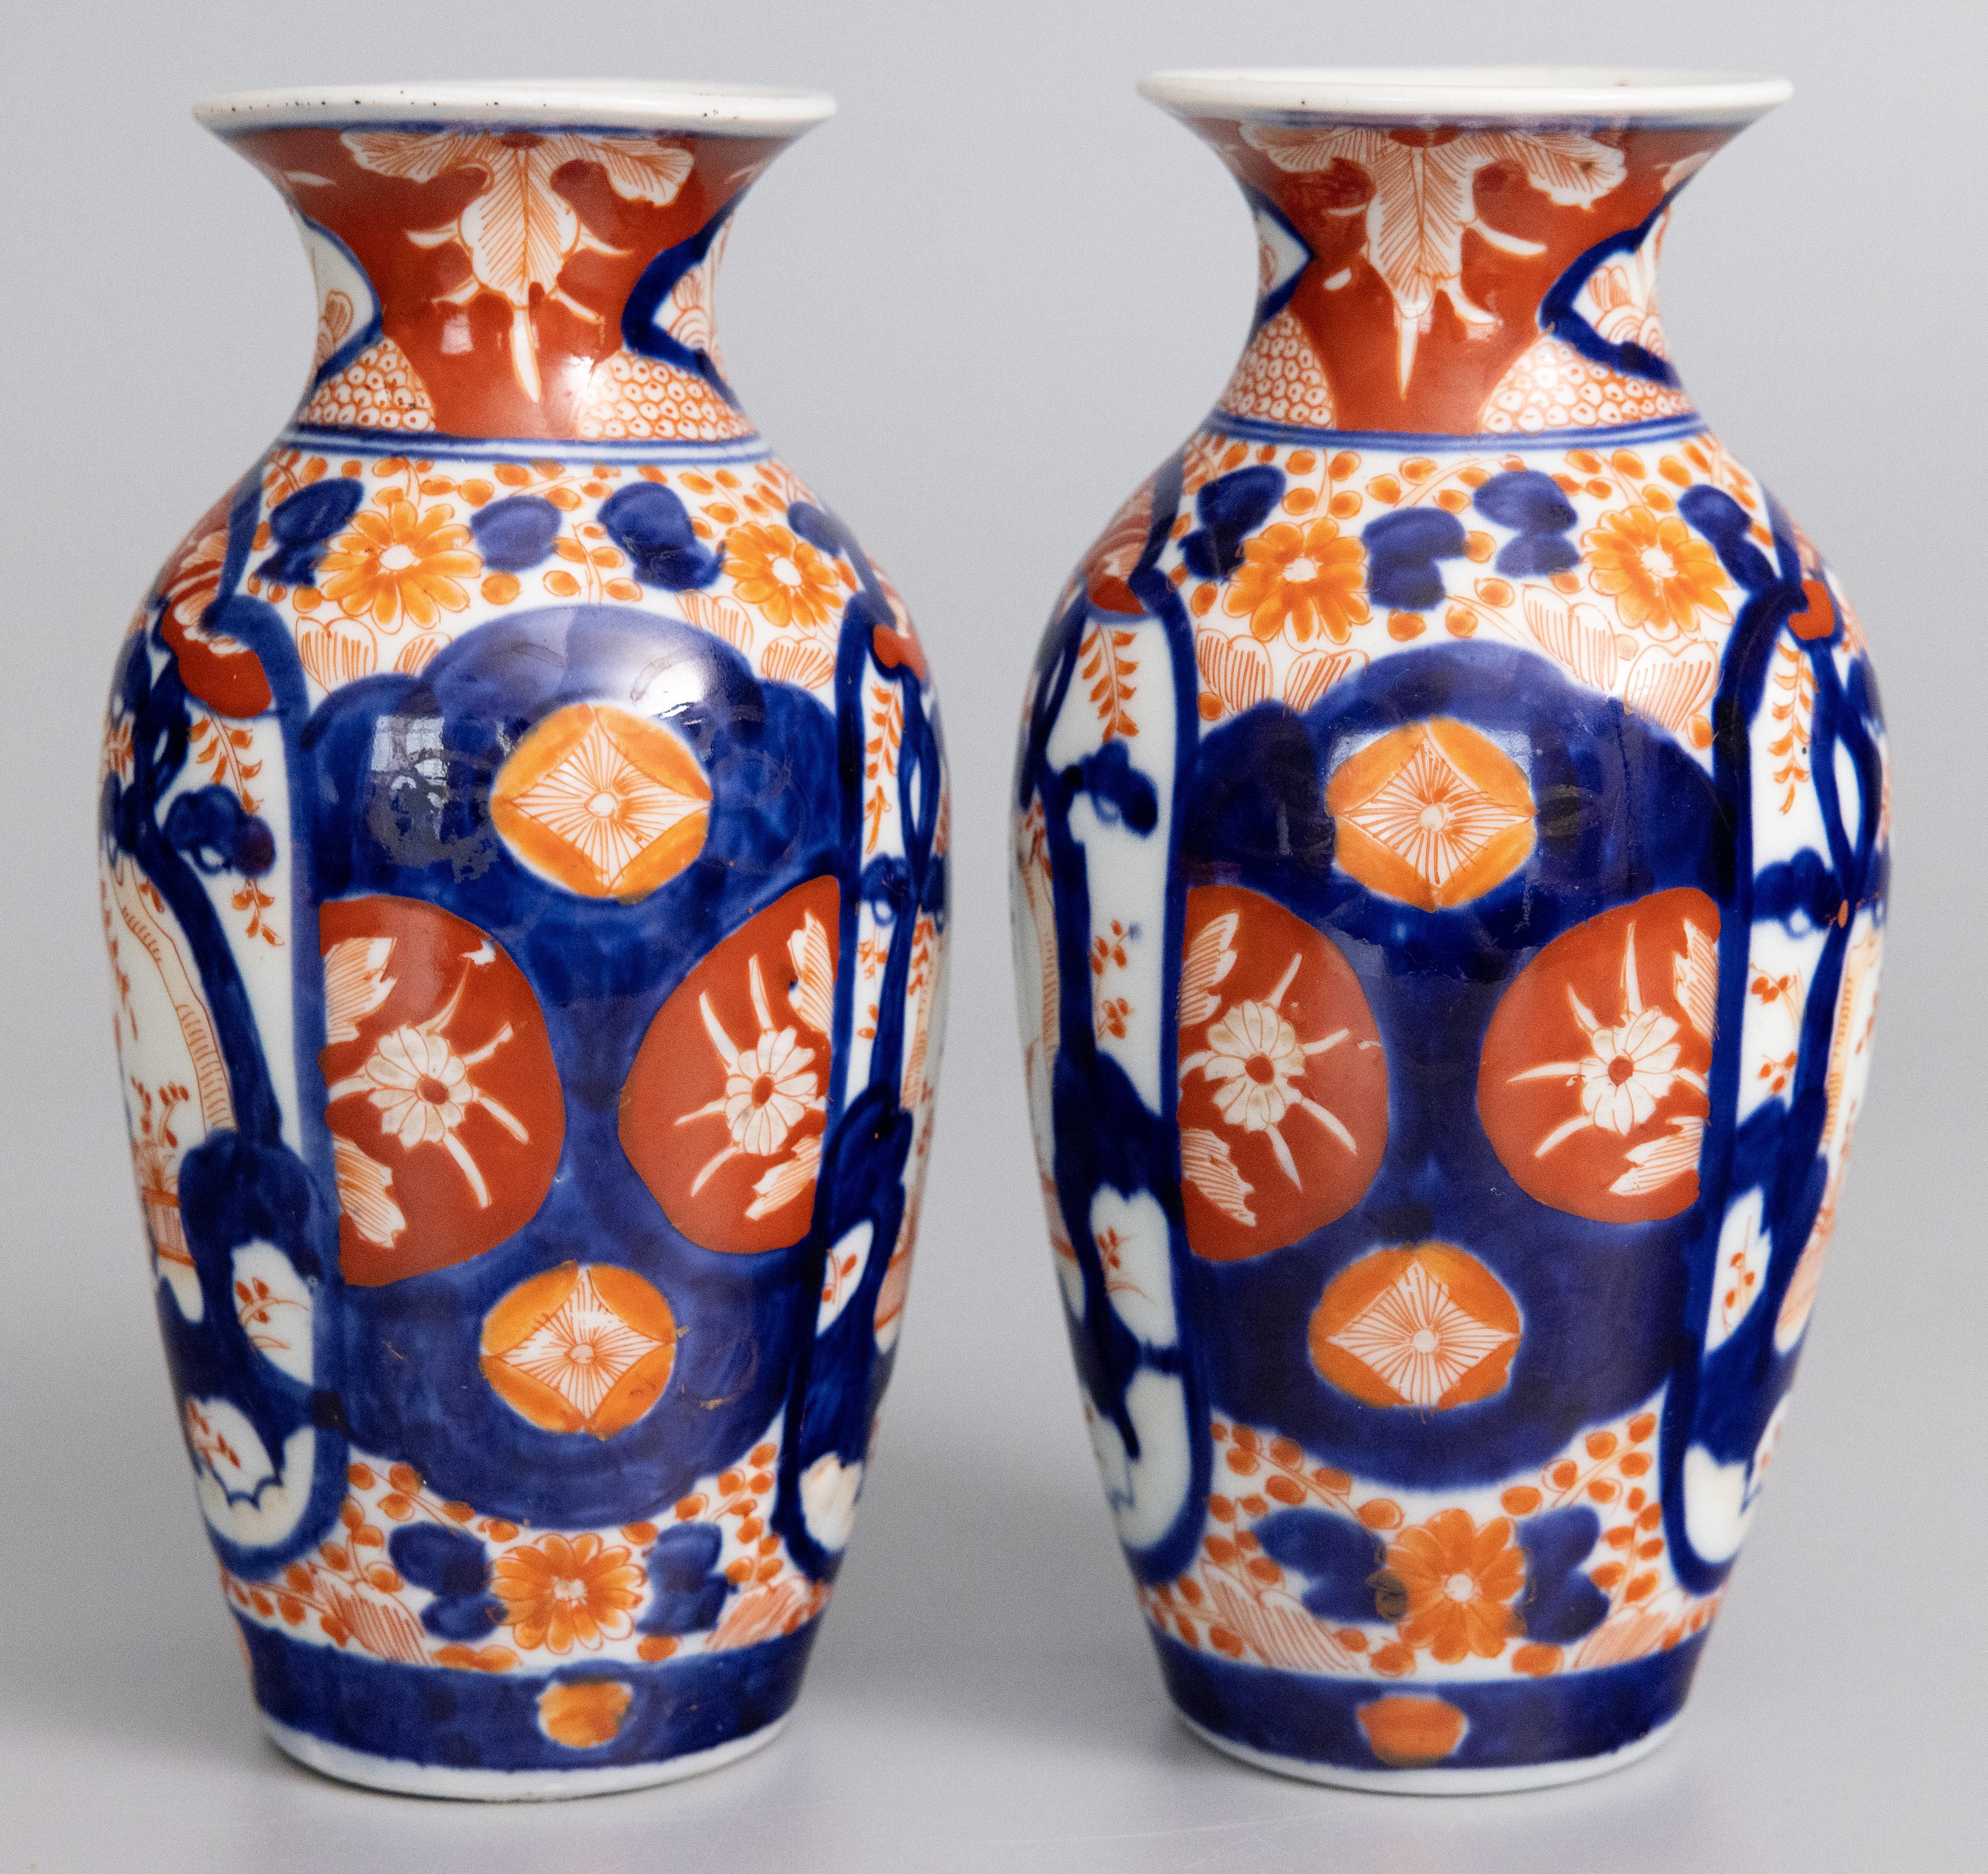 Fired Antique 19th Century Japanese Imari Porcelain Vases - a Pair For Sale